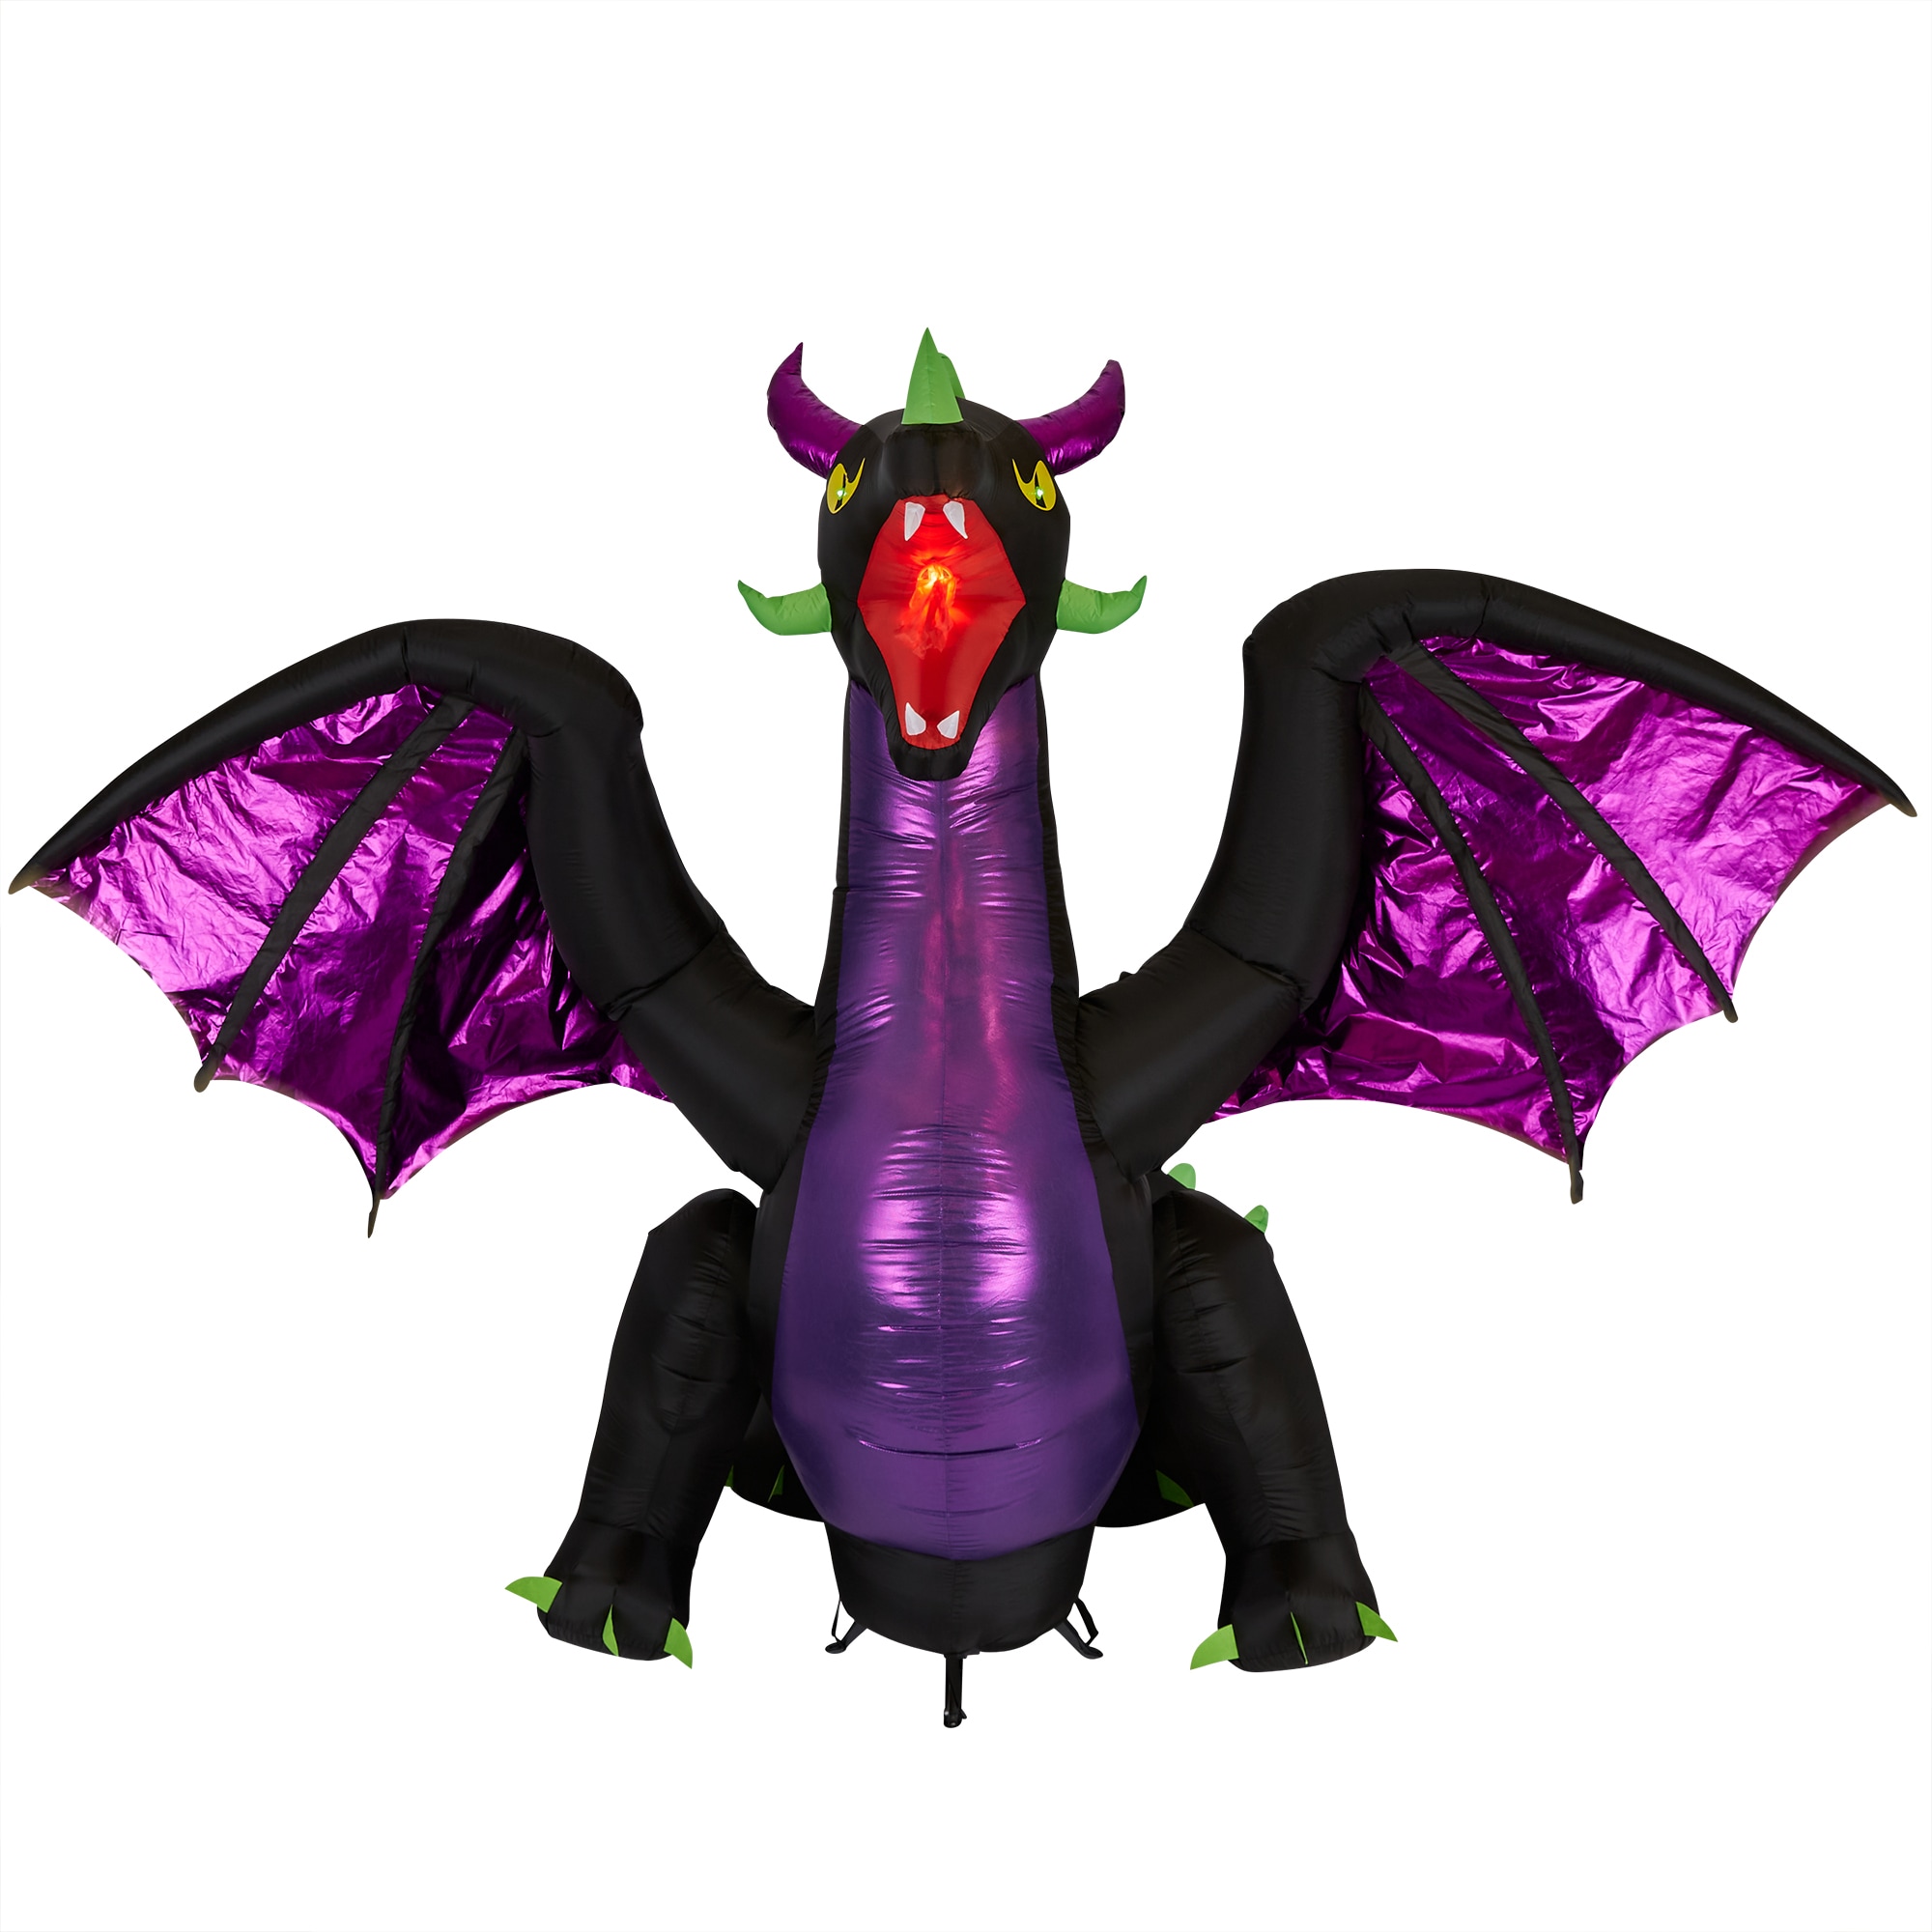 Halloween Gemmy 11 ft Animated Projection Dragon with Wings Airblown Inflatable